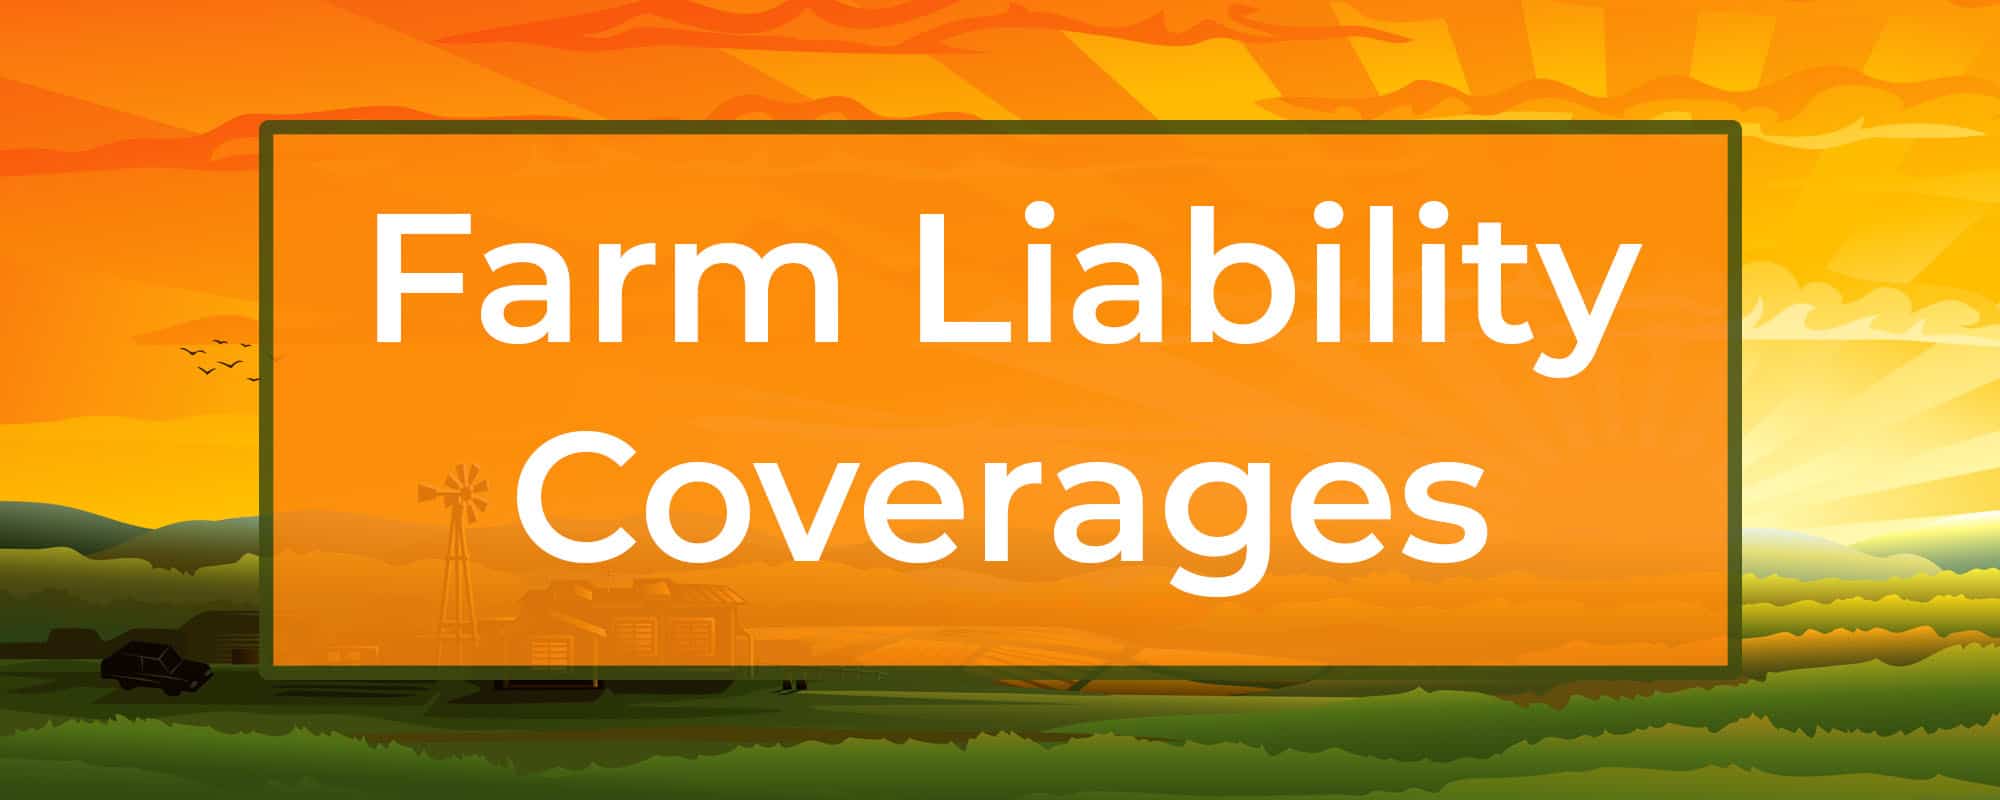 Featured image for “Farm Liability Coverages”